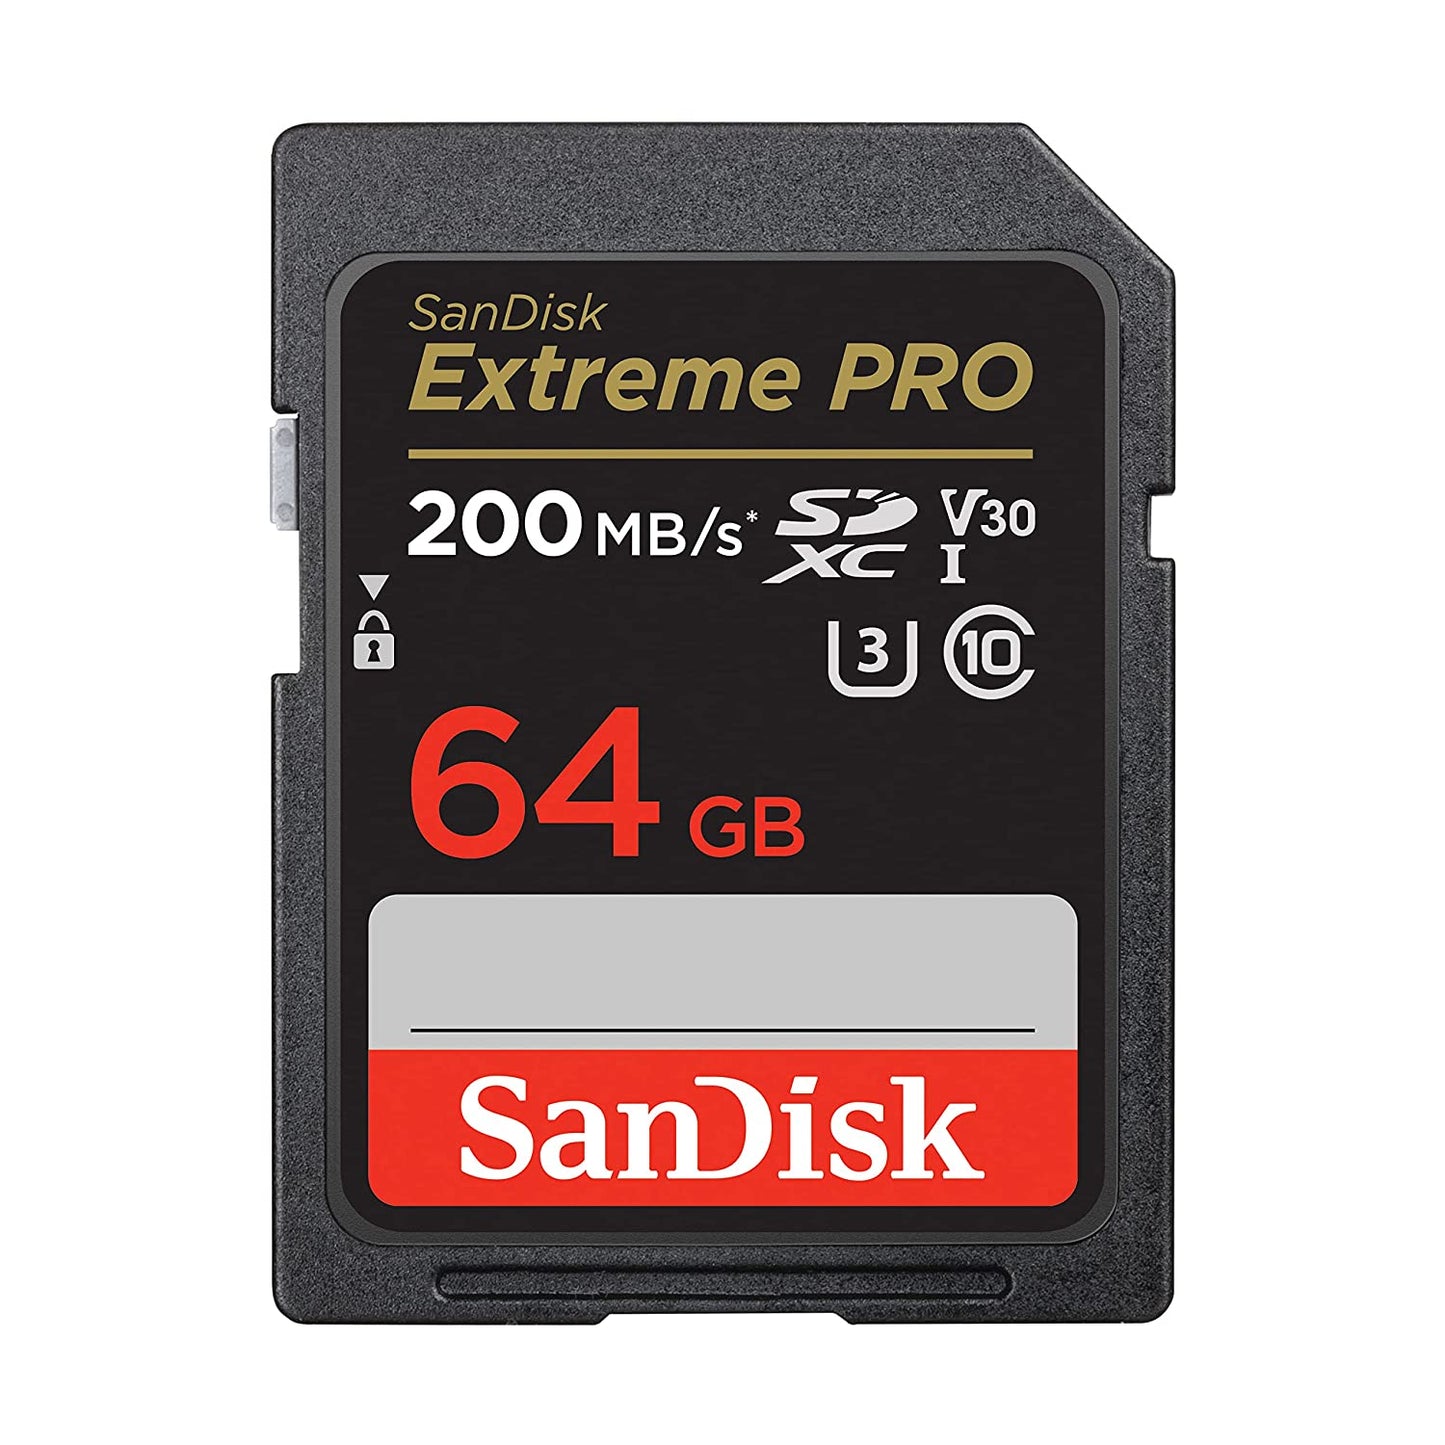 SanDisk Extreme PRO SDHC and SDXC UHS-I Cards Computer Accessories